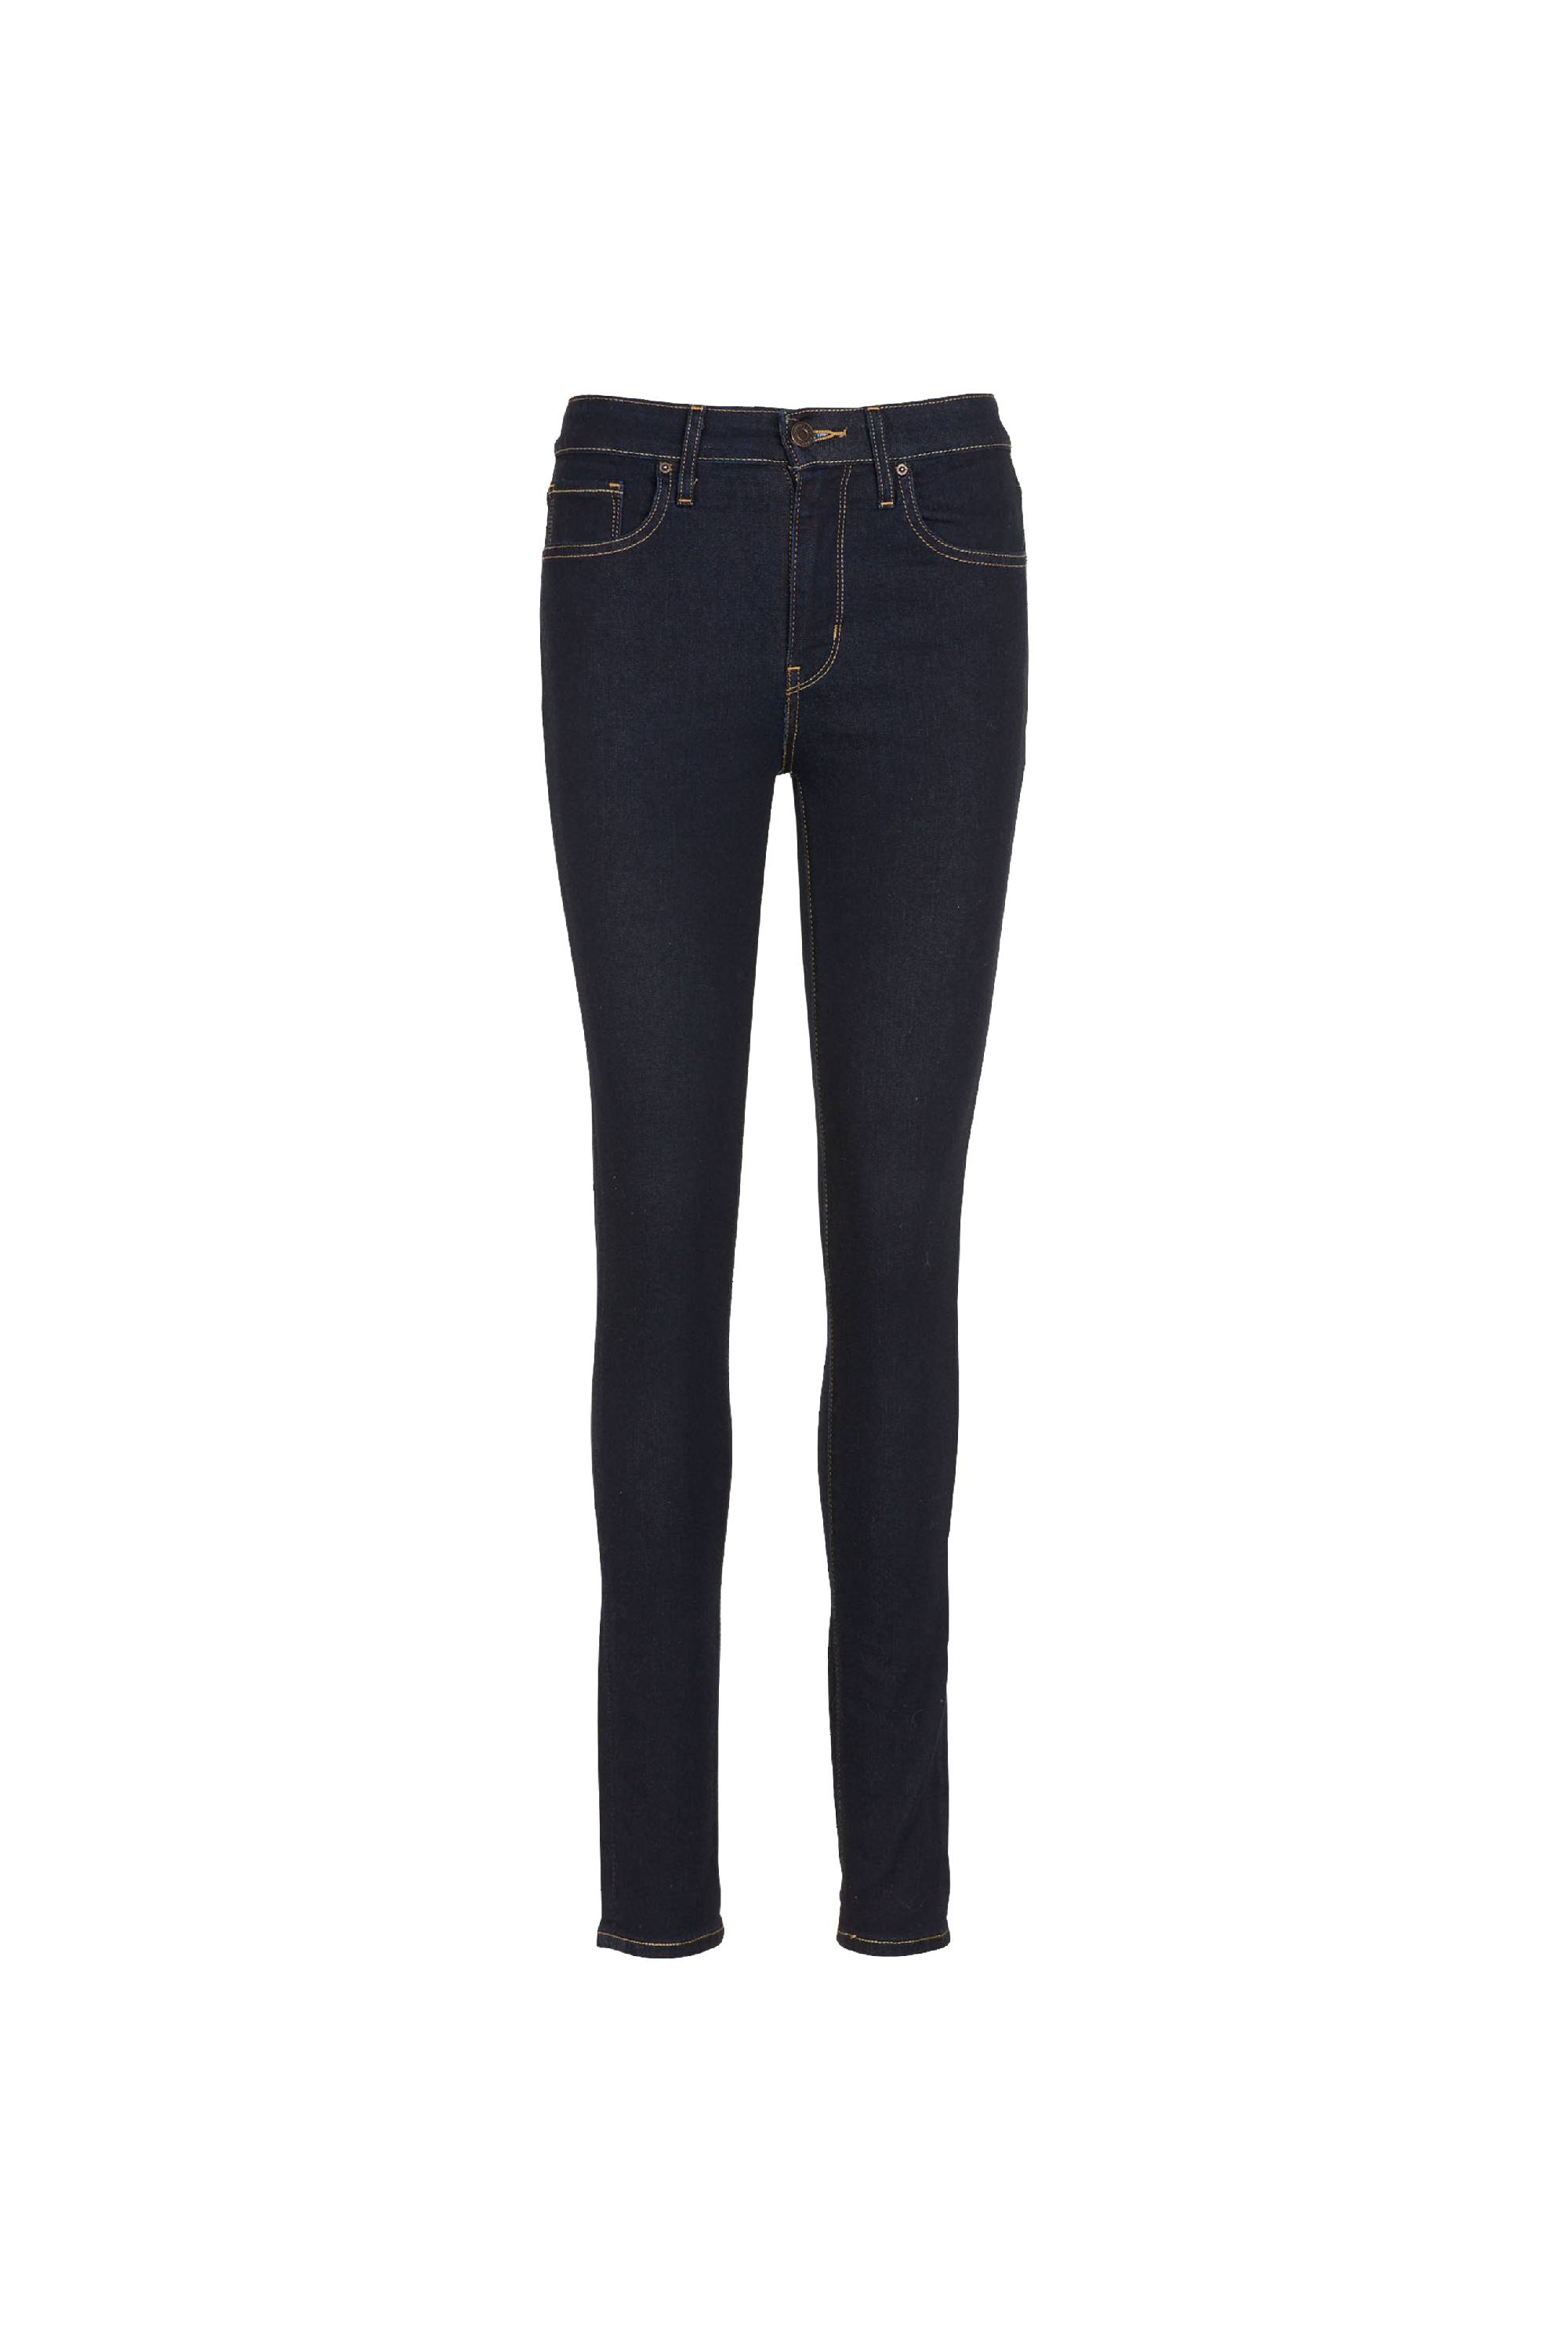 Levi's - Jean 721 High Rise Skinny - Taille 29/32